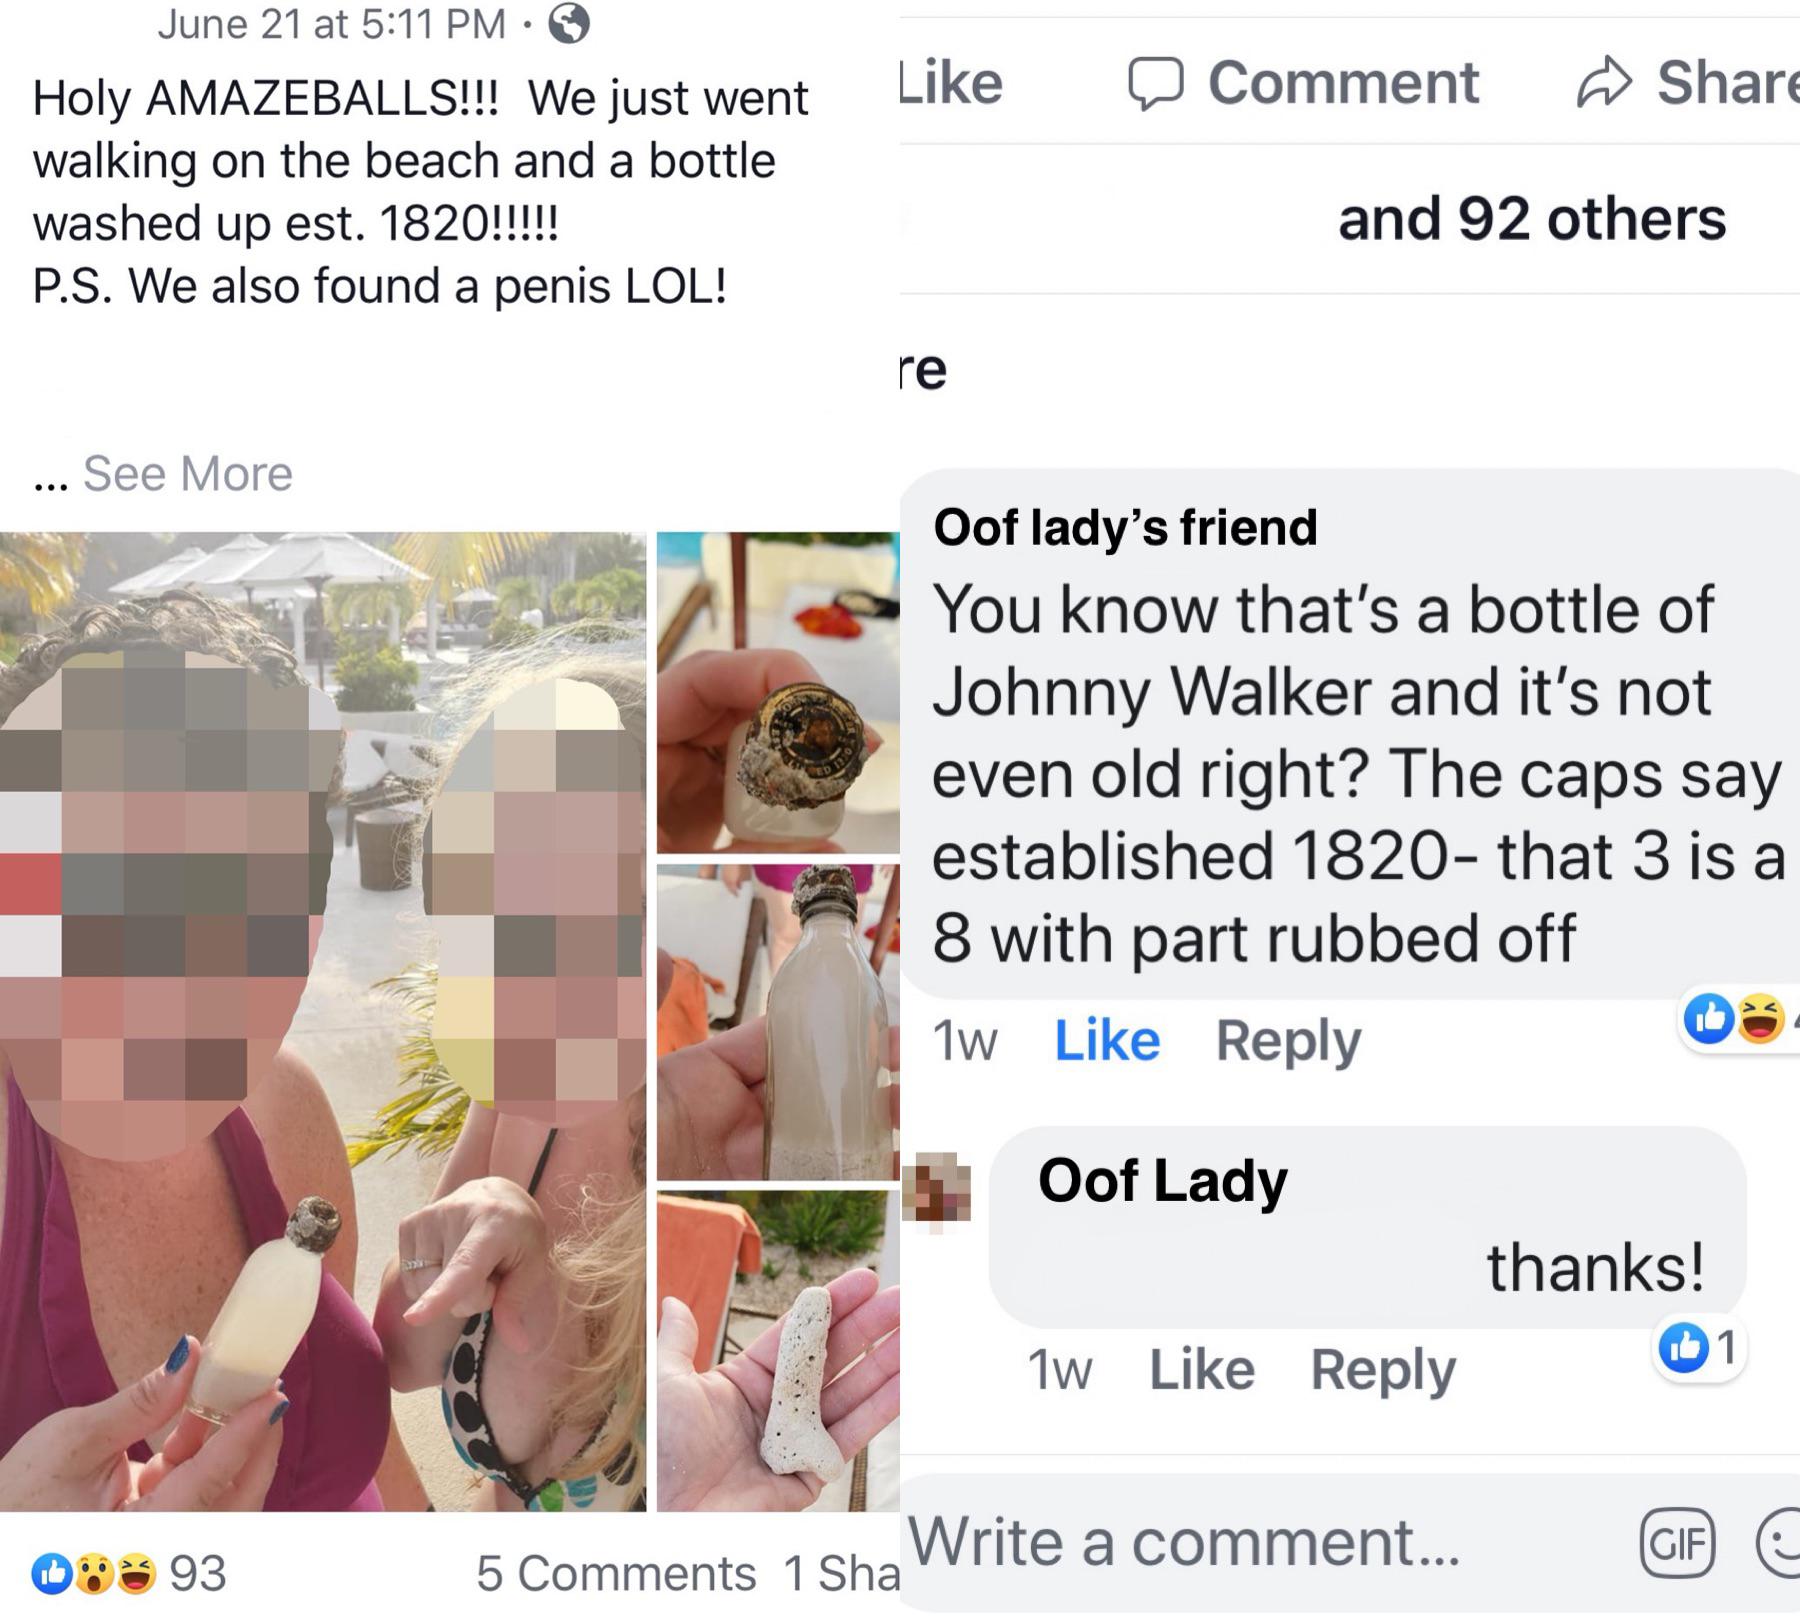 child - a Comment June 21 at Holy Amazeballs!!! We just went walking on the beach and a bottle washed up est. 1820!!!!! P.S. We also found a penis Lol! and 92 others ... See More Oof lady's friend You know that's a bottle of Johnny Walker and it's not eve